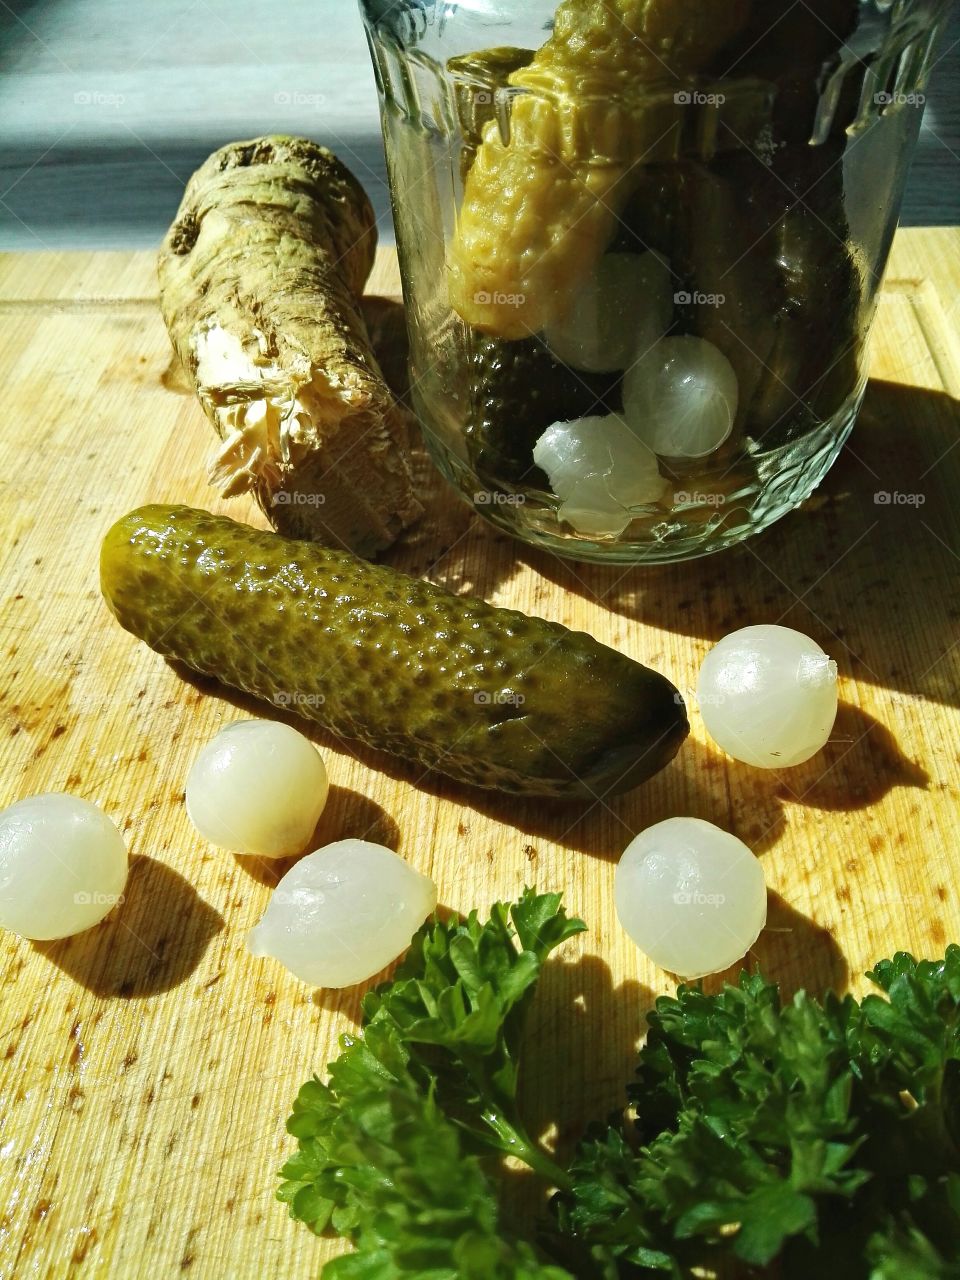 Homemade pickles with onion and horseradish